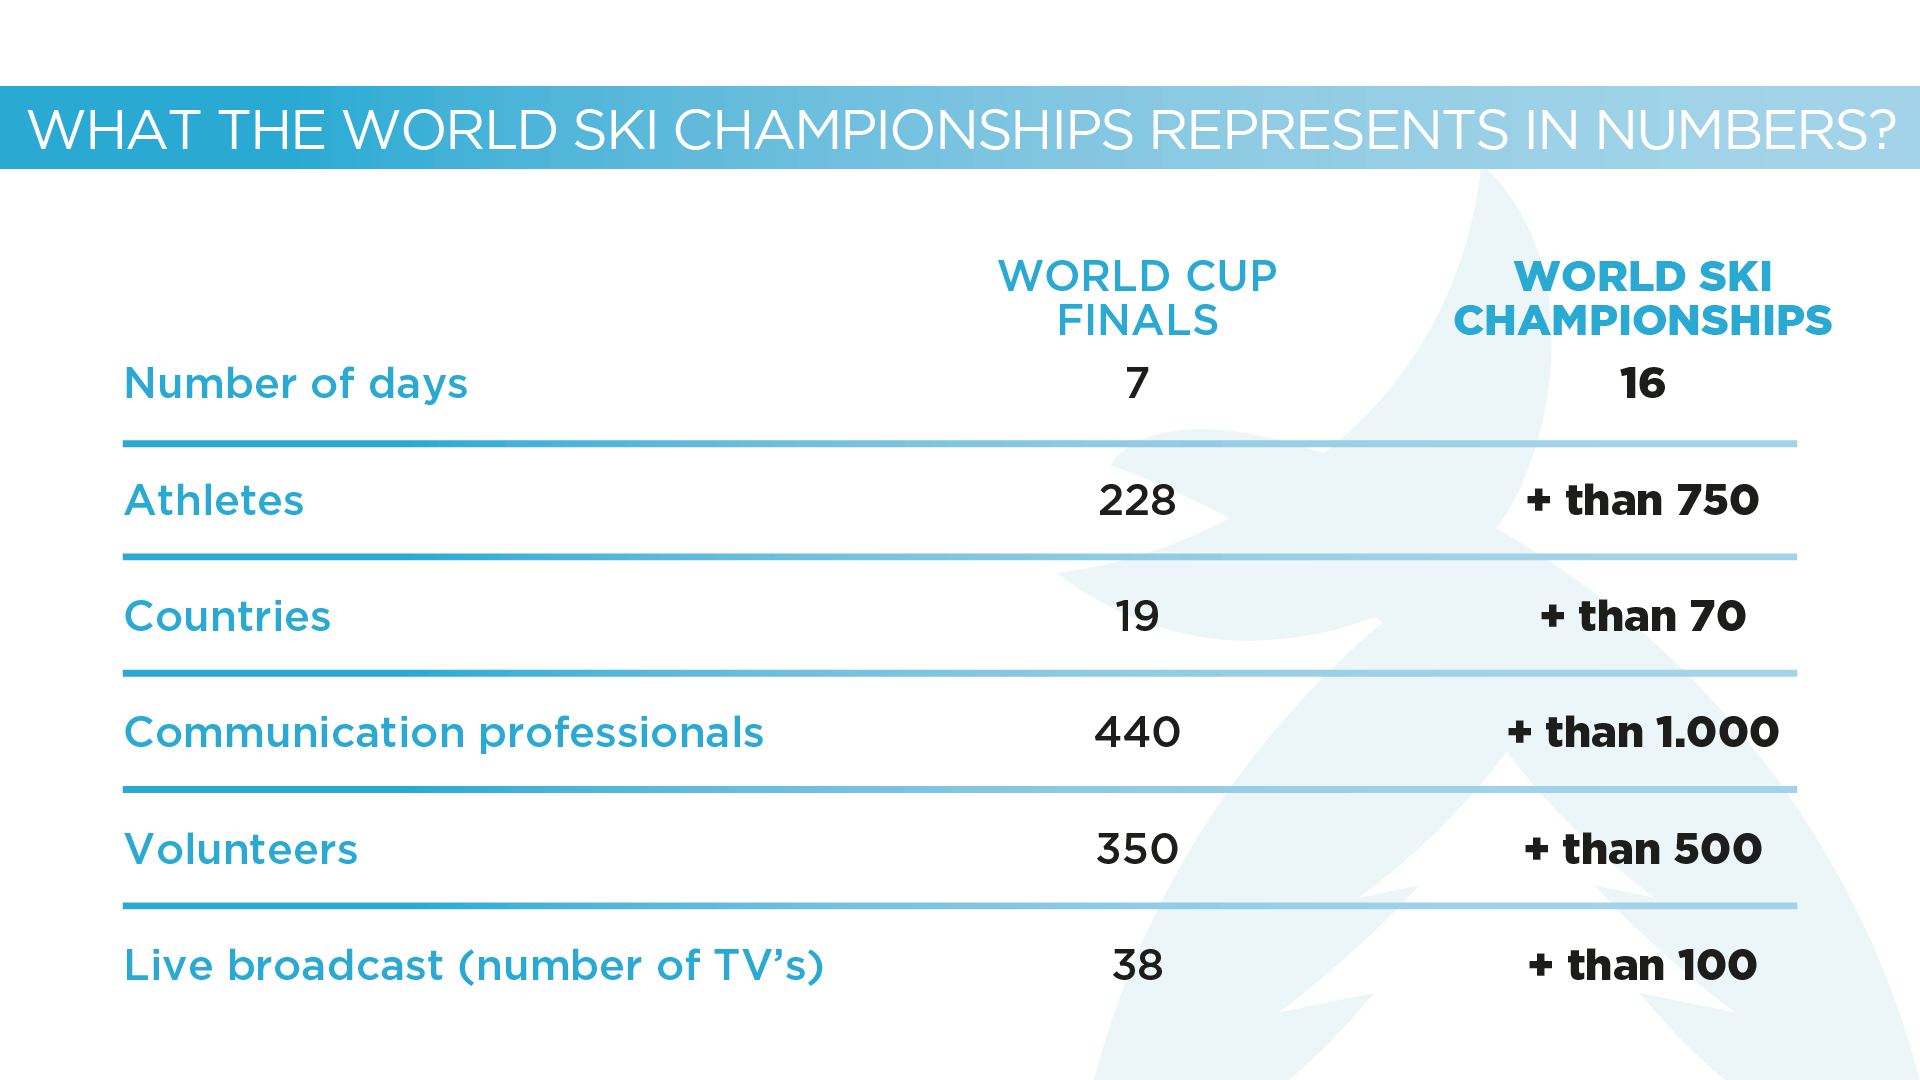 WHAT THE WORLD CUP REPRESENTS IN NUMBERS?